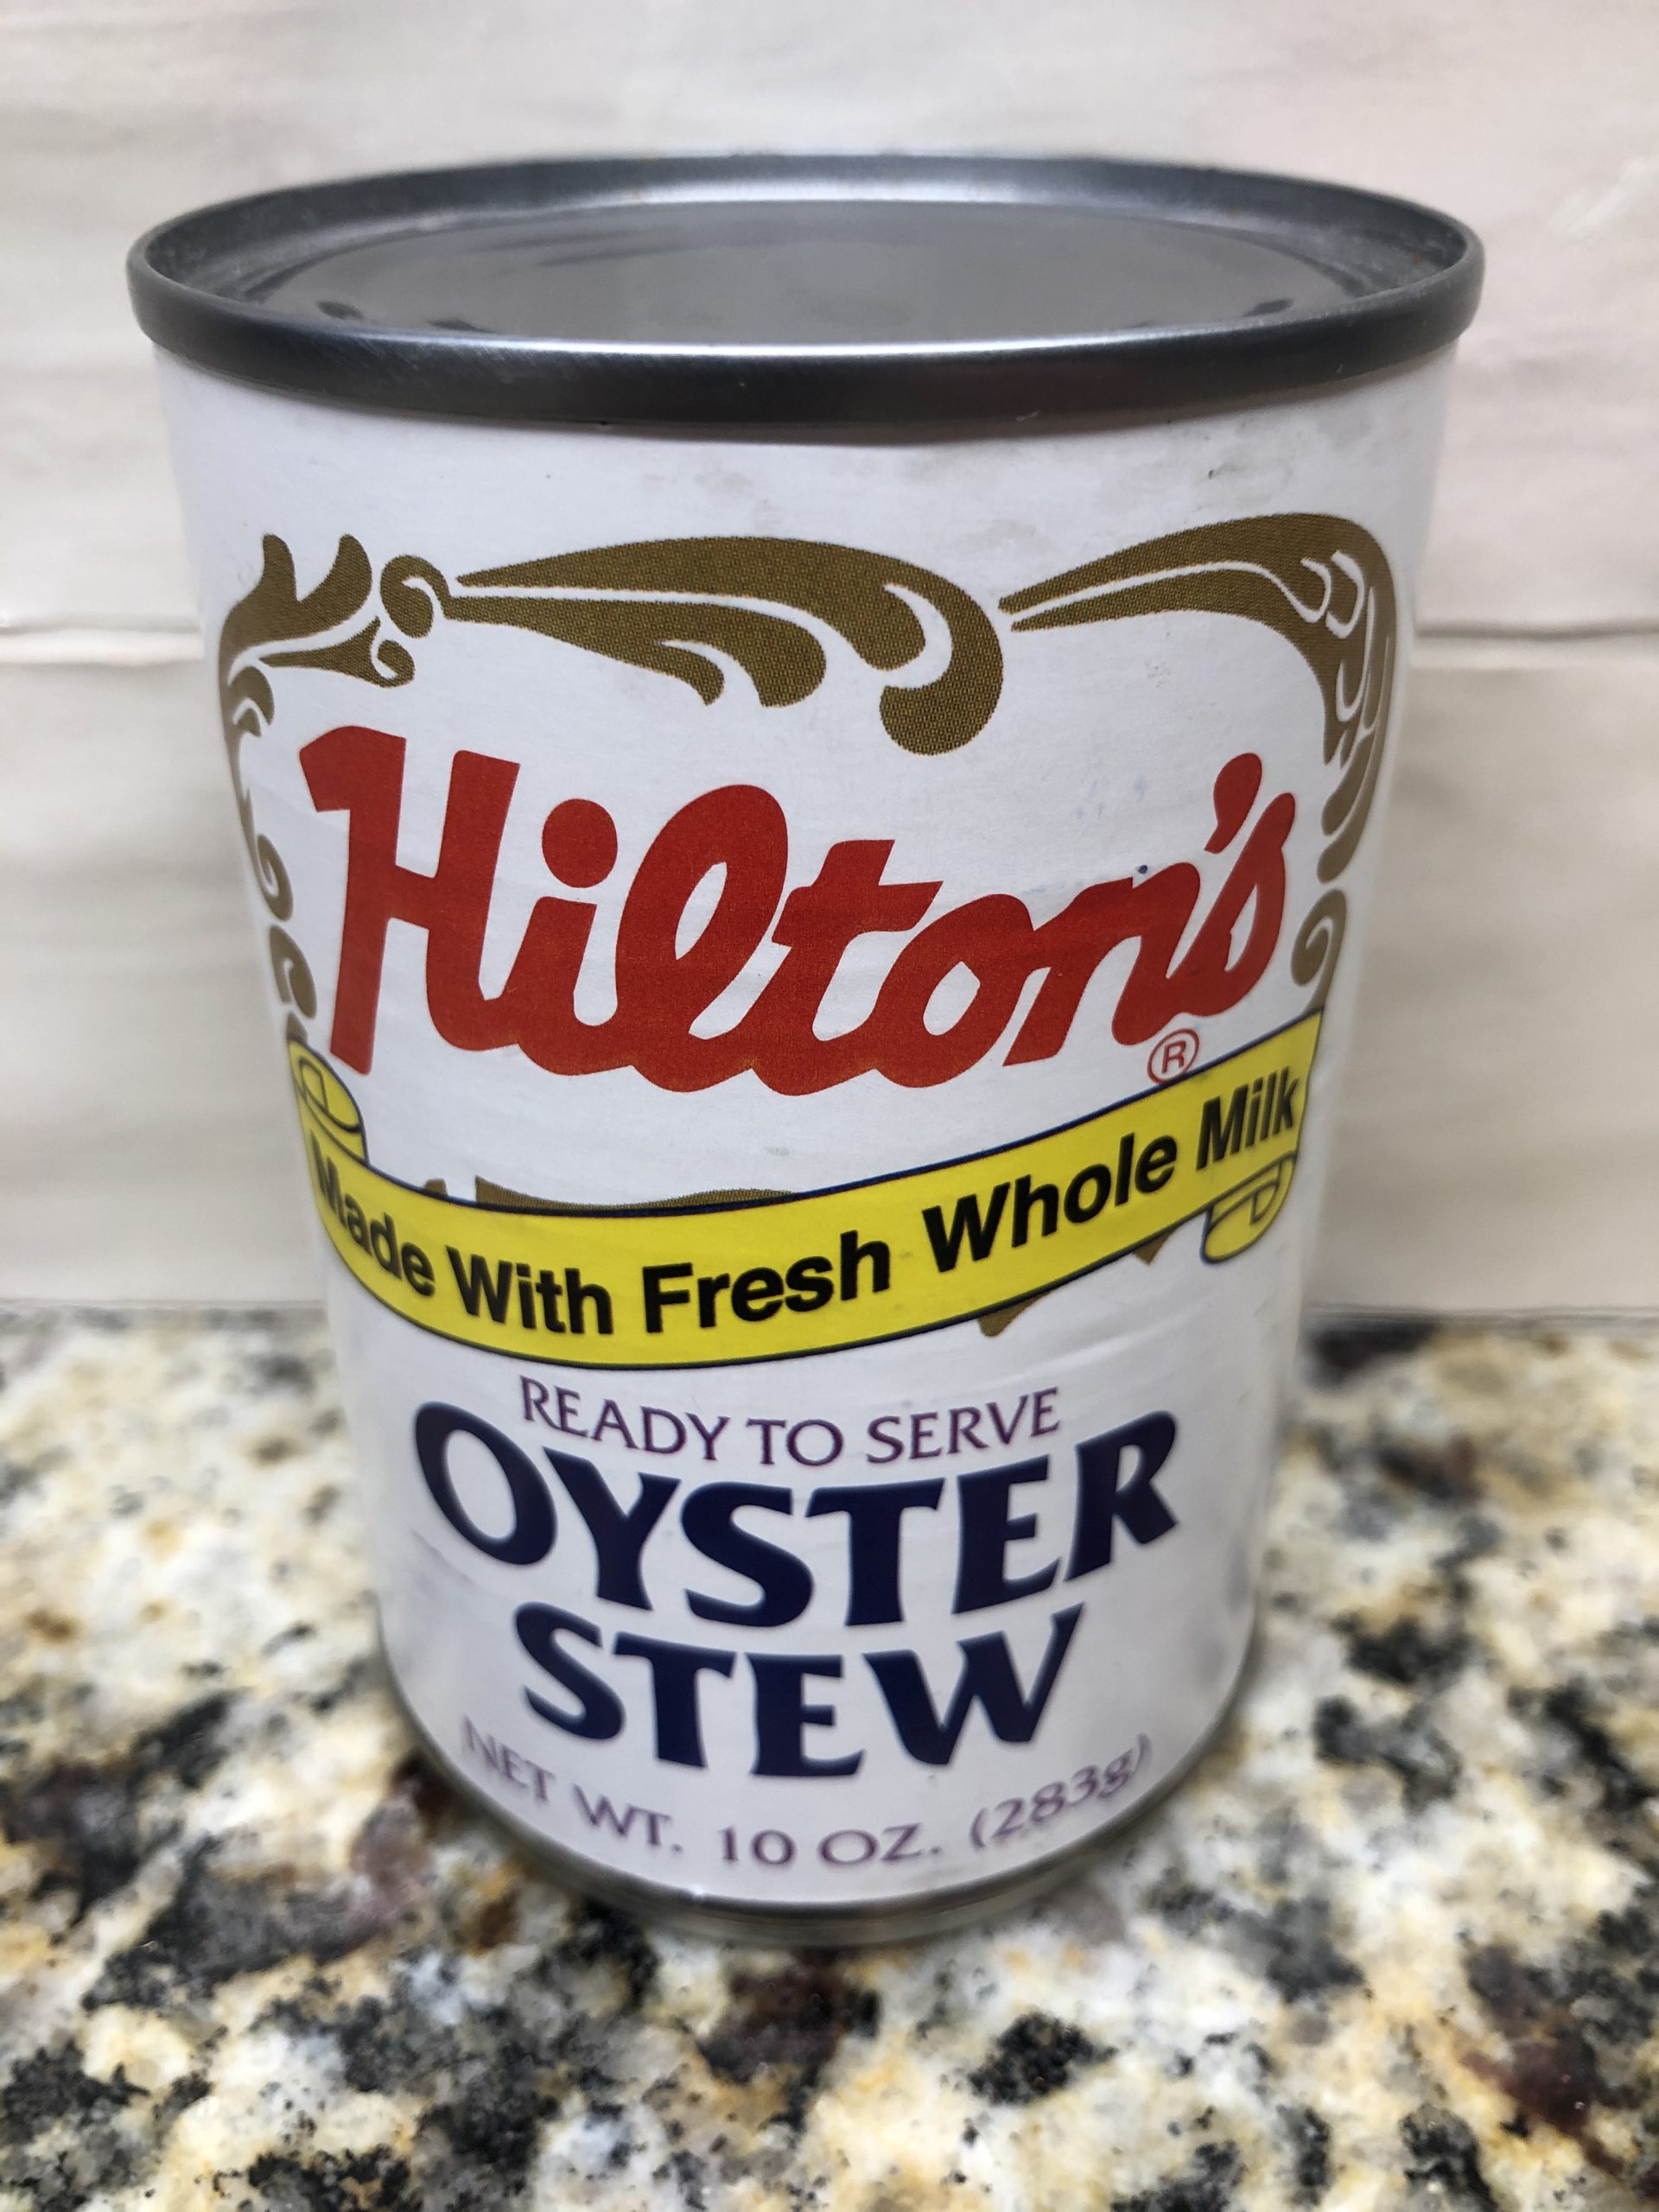 Hilton’s Oyster Stew made with fresh milk and butter 10 oz Can Chowder ...